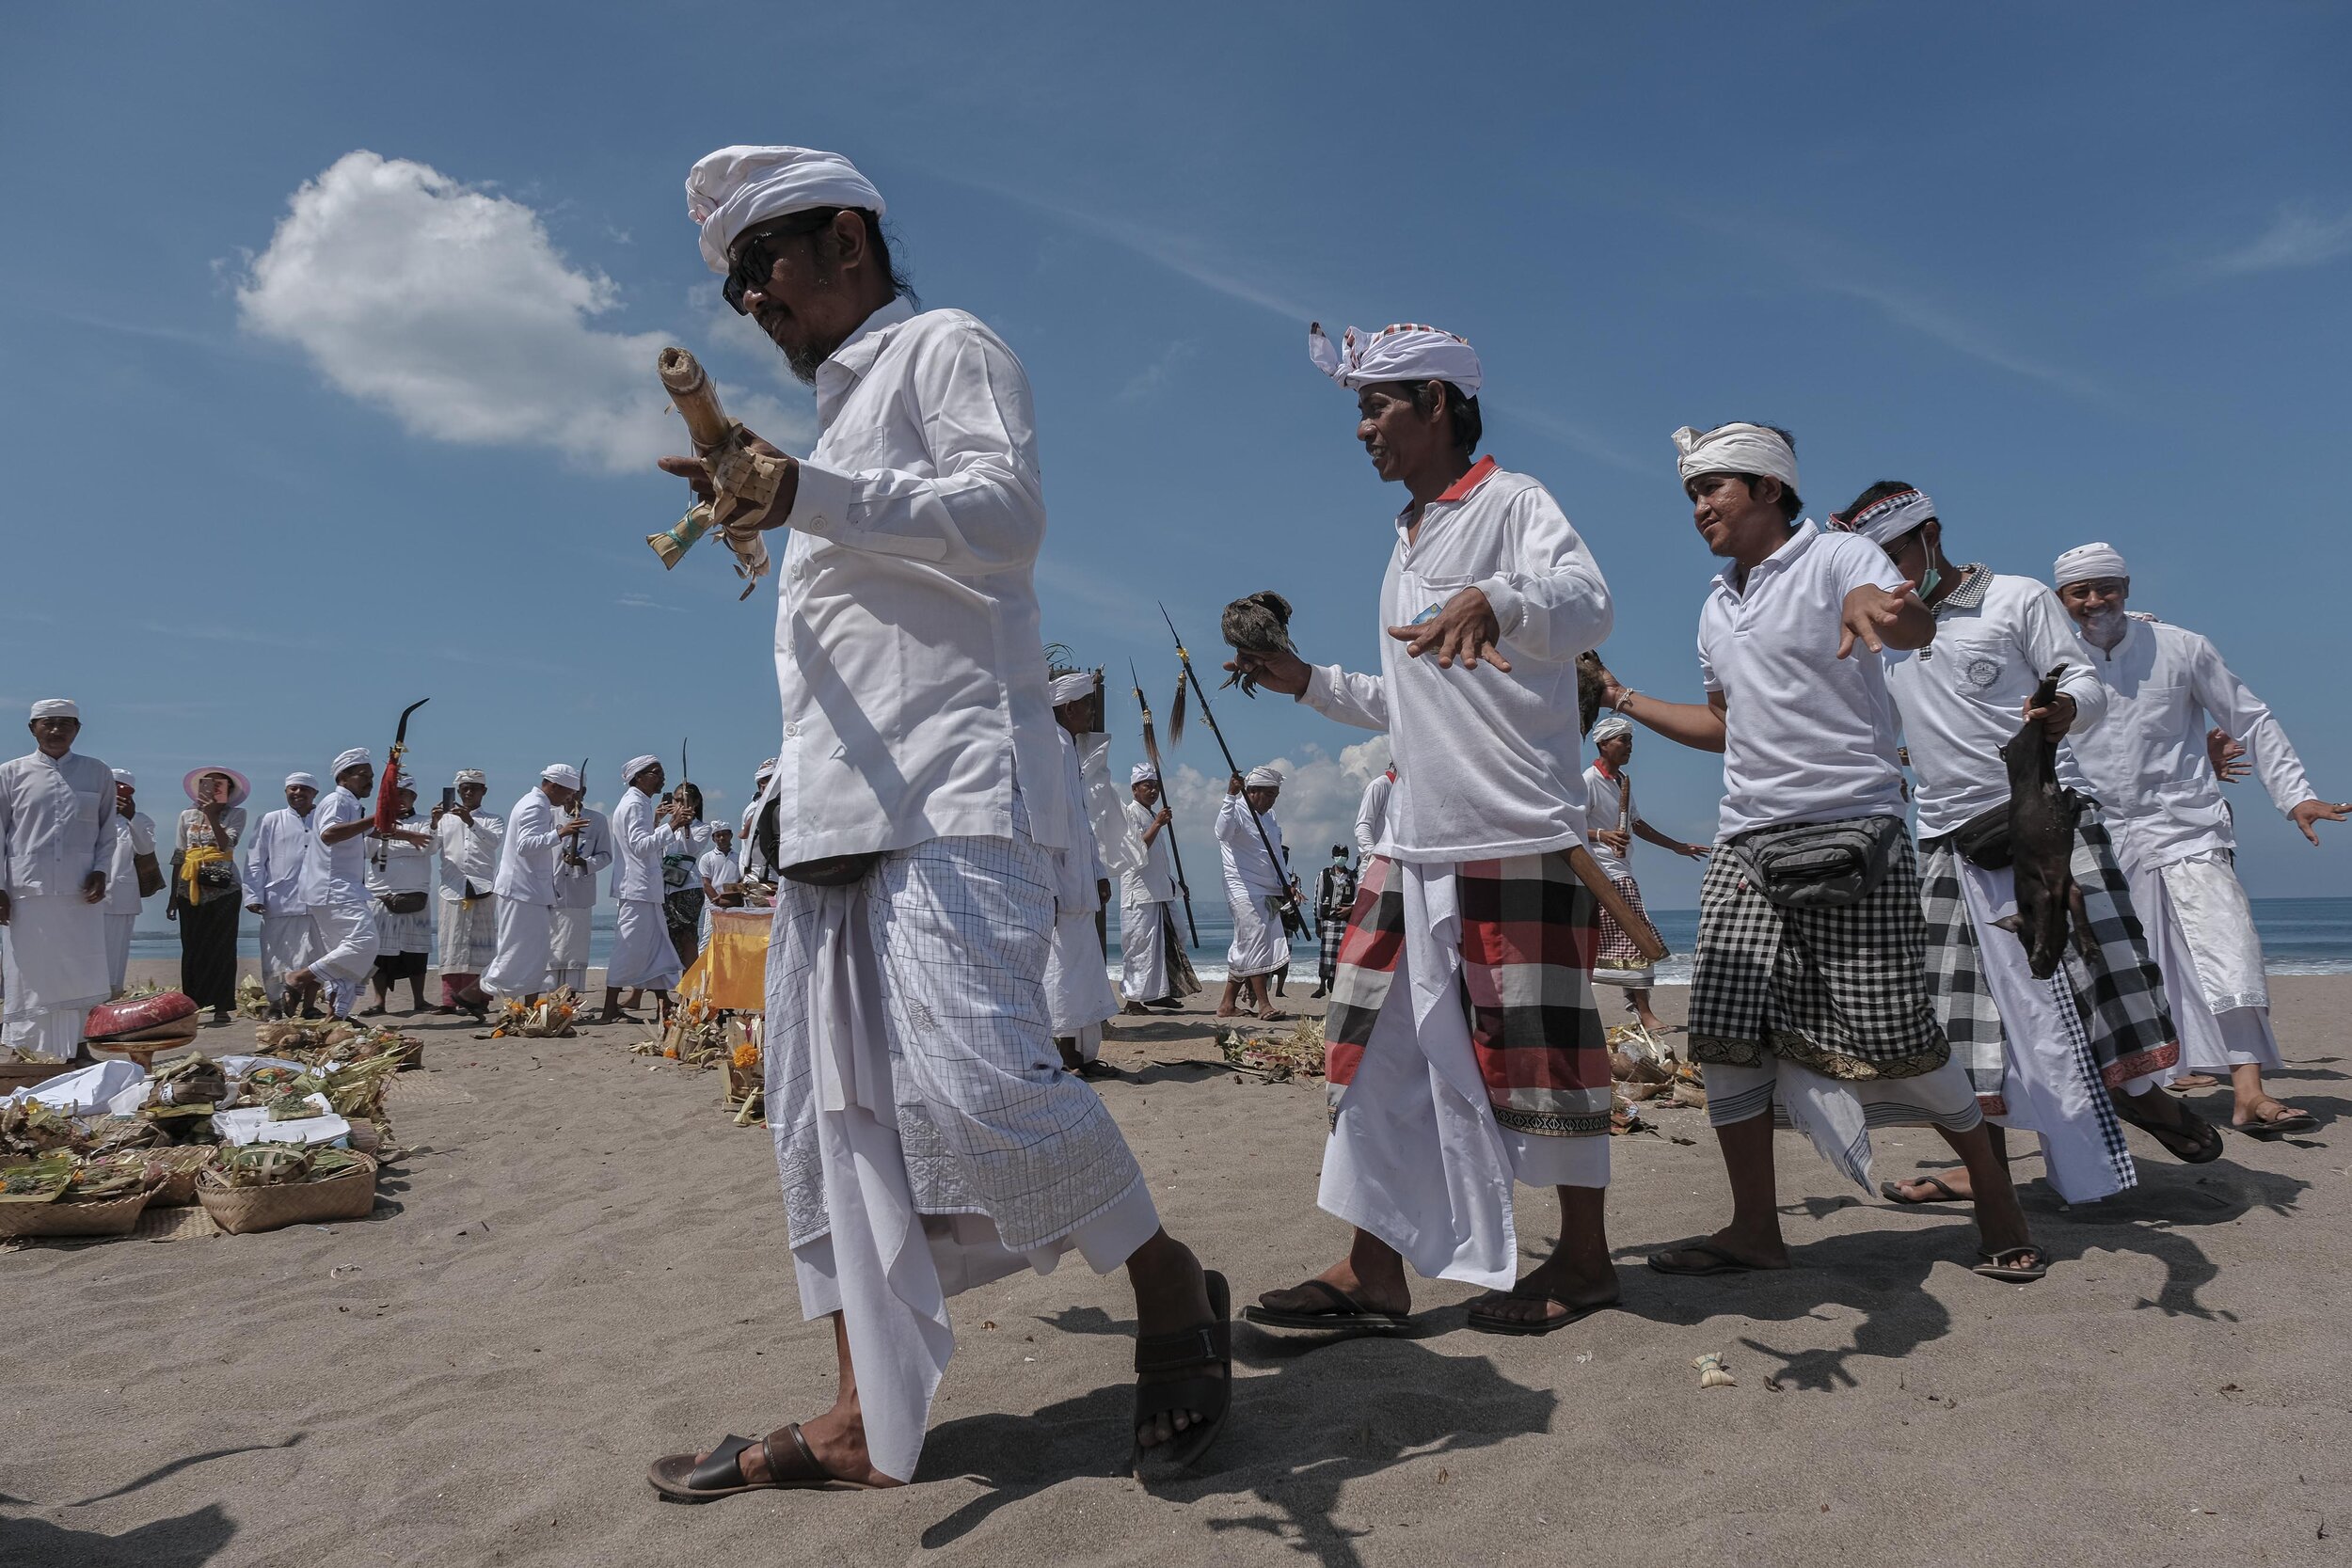  Participants of the ritual walk around while carrying sacred objects and various offerings. Photo by Agoes Rudianto. 